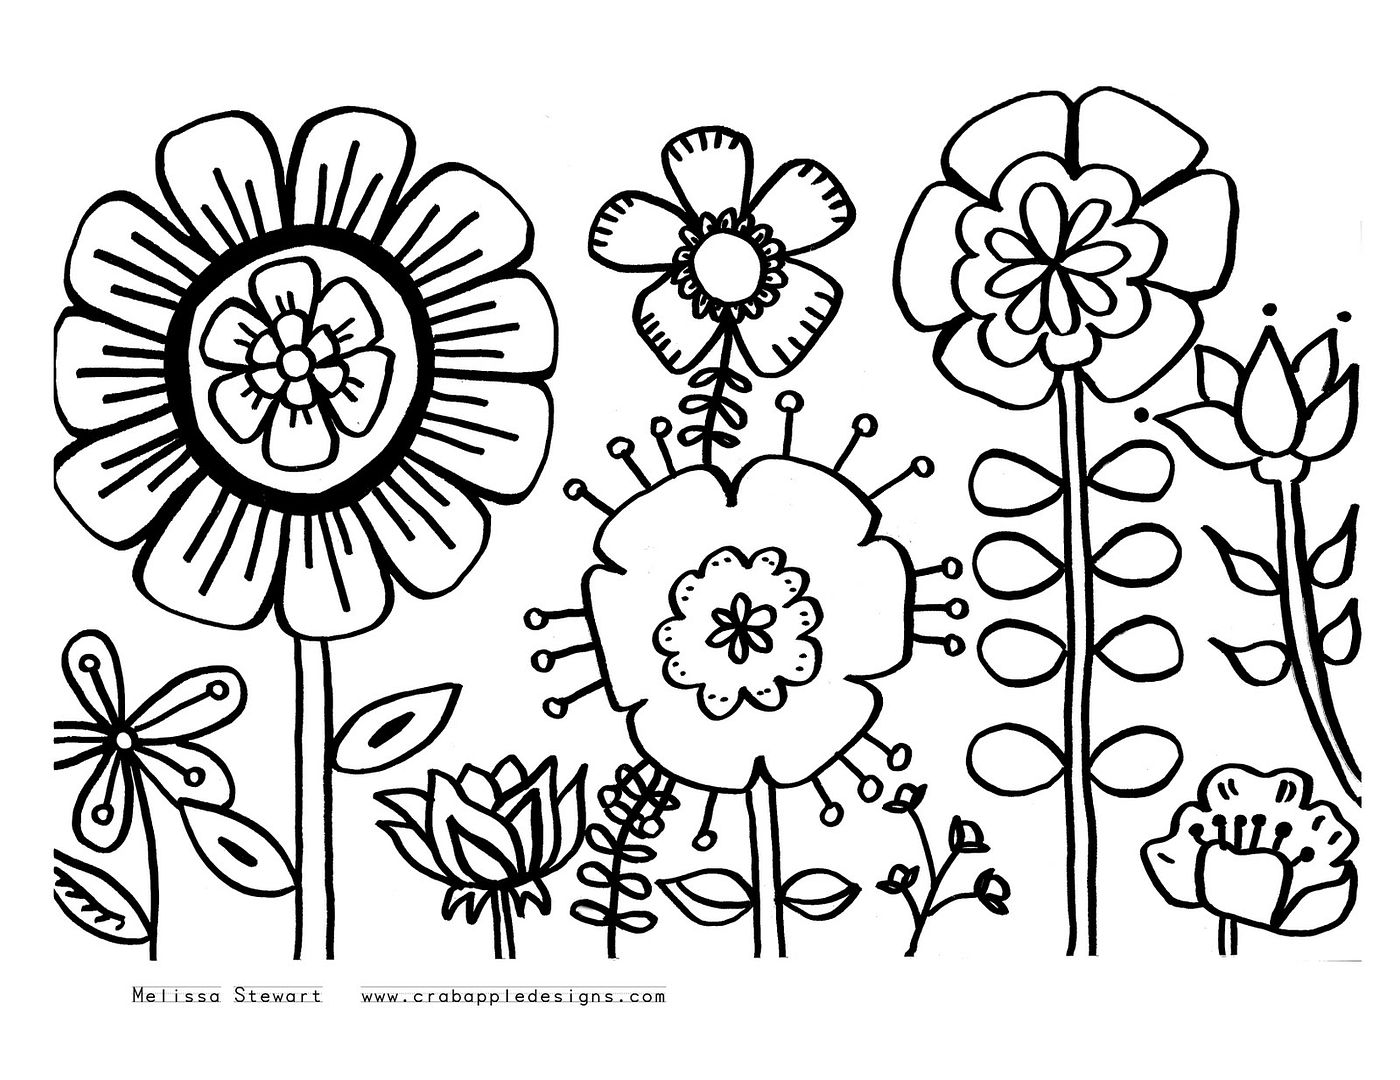 Free printable summer coloring page: Summer flower garden from Crabapple Designs